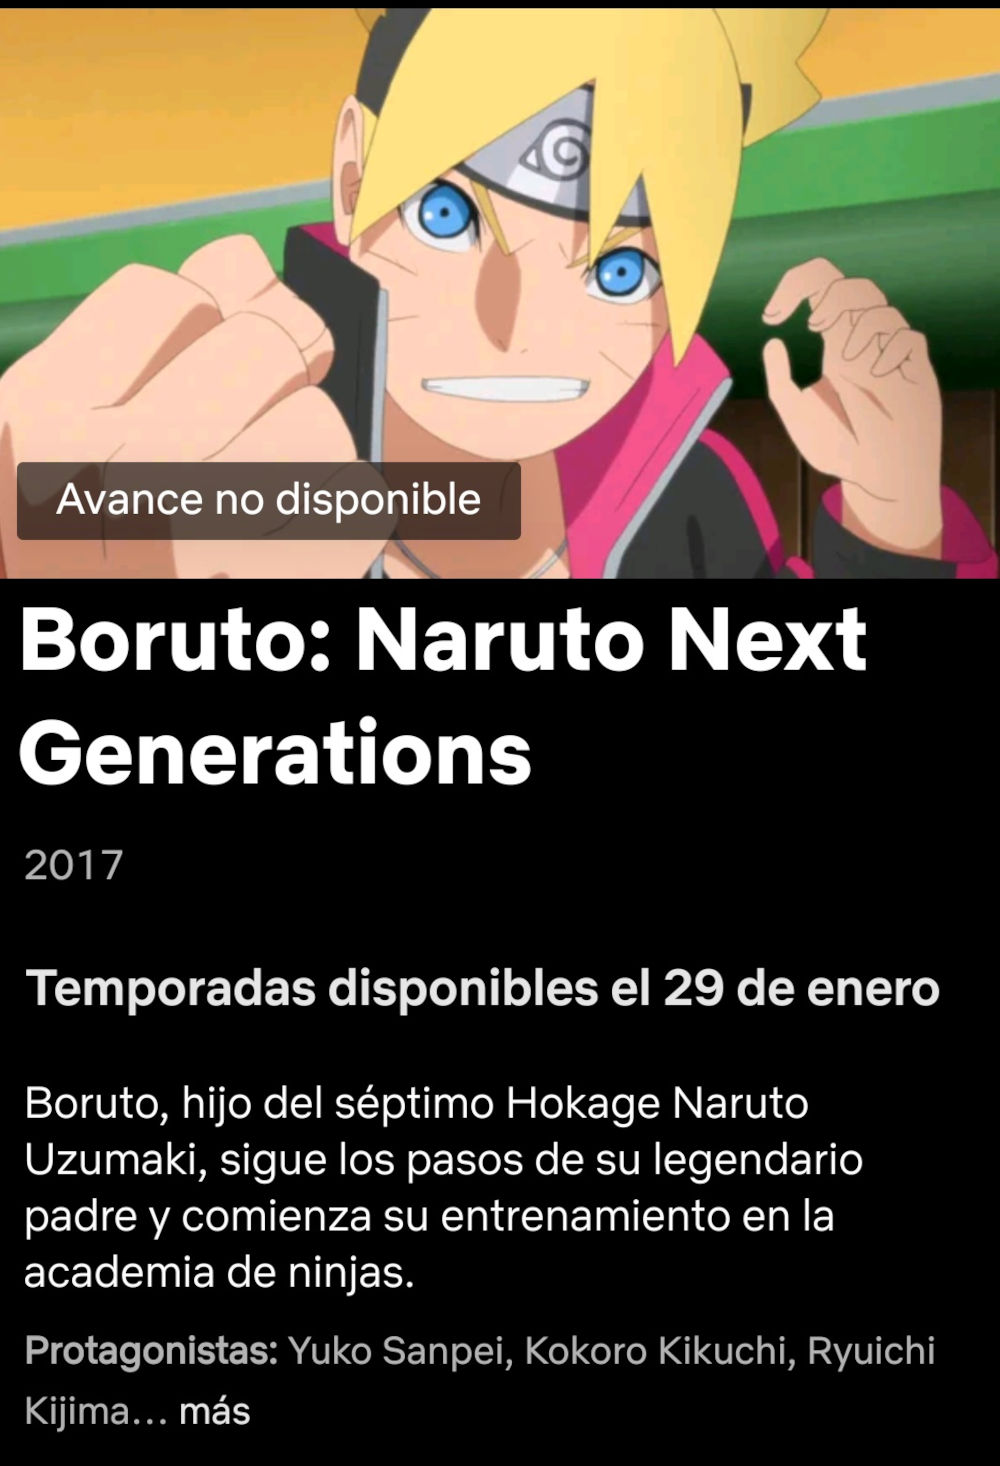 Boruto will arrive Netflix with everything and Latin dubbing